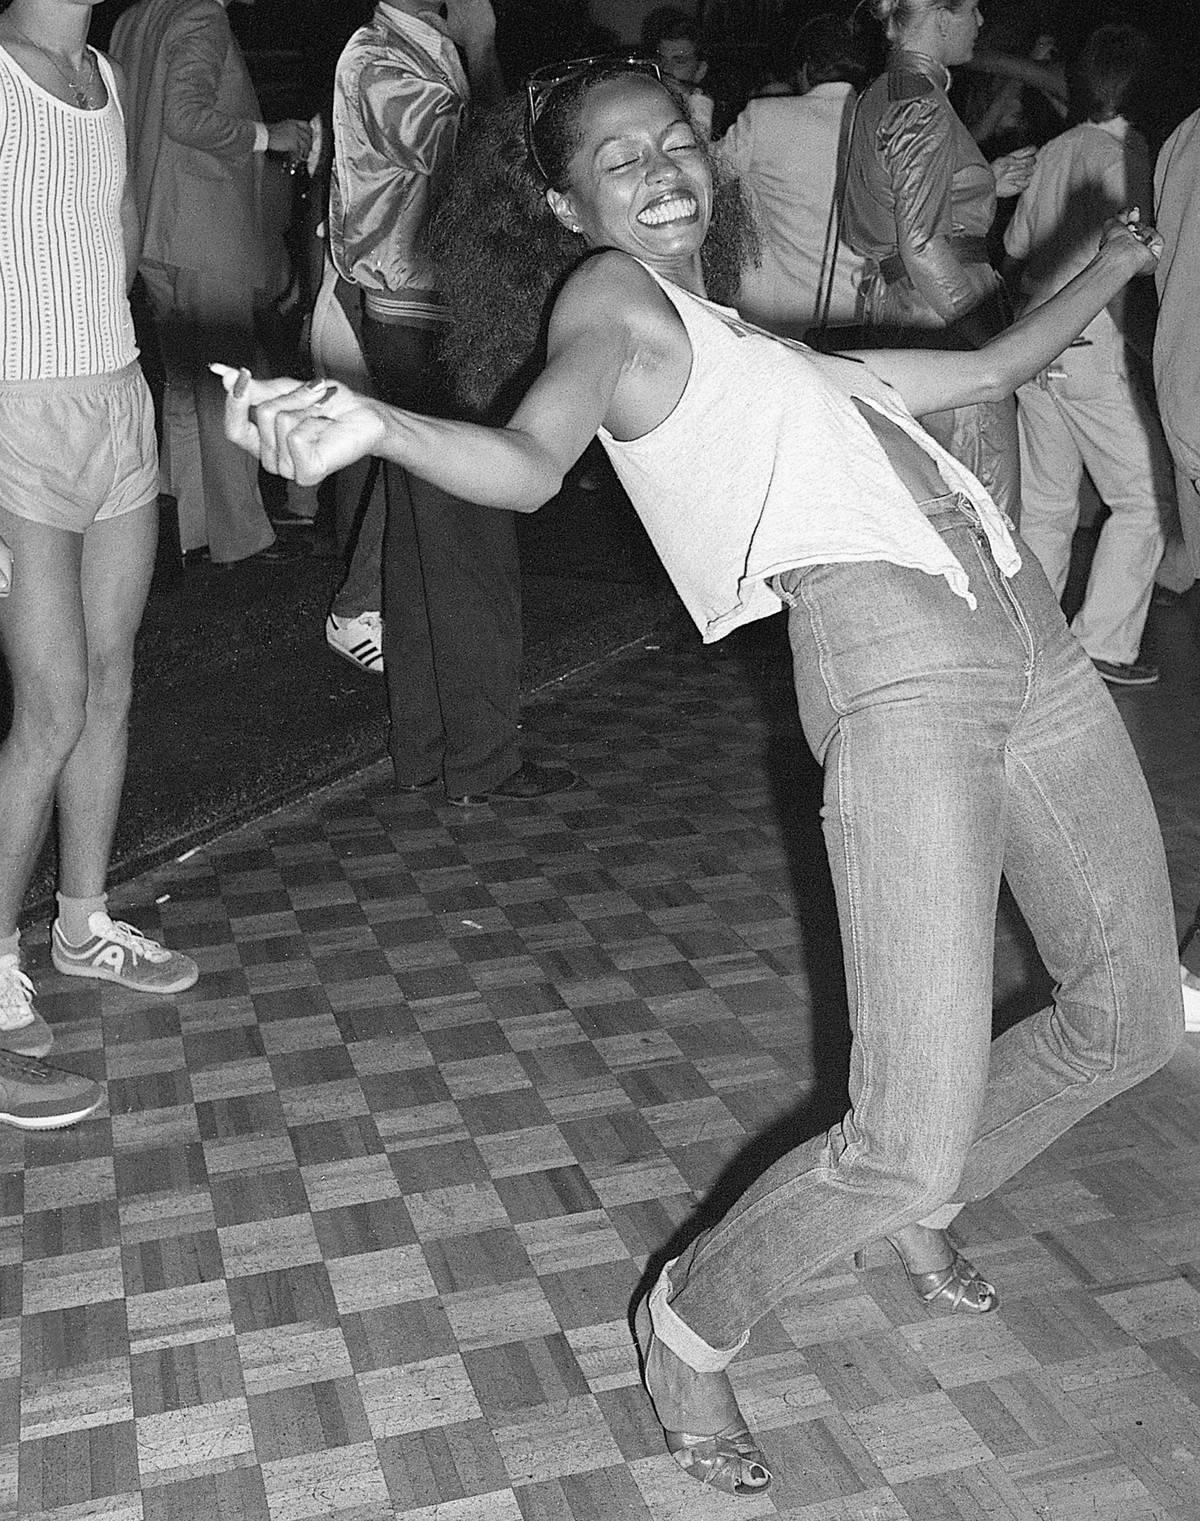 <p>First becoming popular as a member of the group the Supremes, Diana Ross quickly made a name for herself in the music industry. Here, we see her dancing the night away in the infamous Studio 54 disco nightclub in Midtown Manhattan, New York.</p> <p>From 1977 to 1980, people would flock to the club to forget about the world around them. Currently, the old Studio 54 location is being used as the location of a Broadway Theatre. </p>